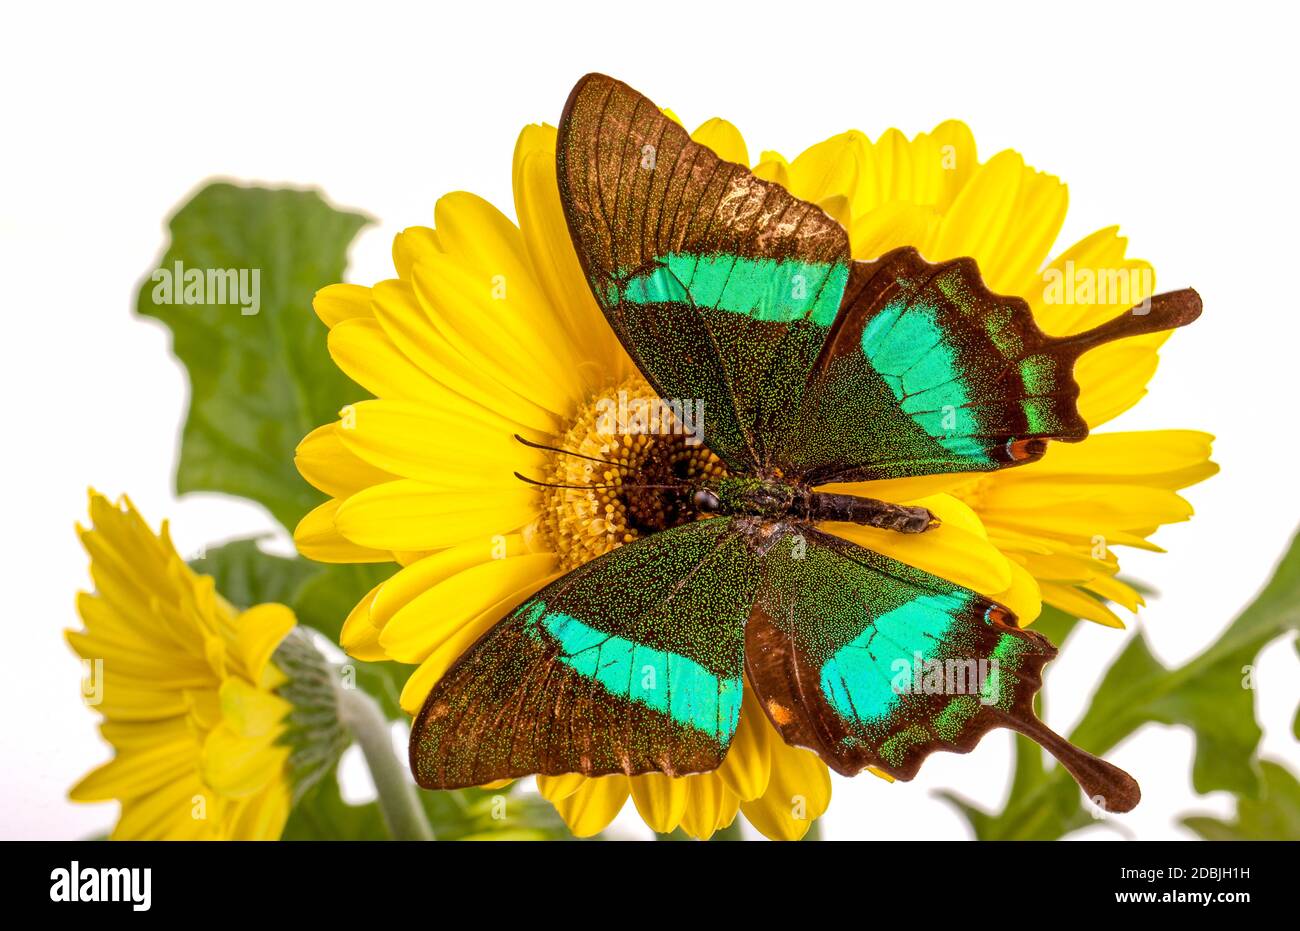 Emerald Swallowtail Butterfly on a Yellow Daisy Stock Photo